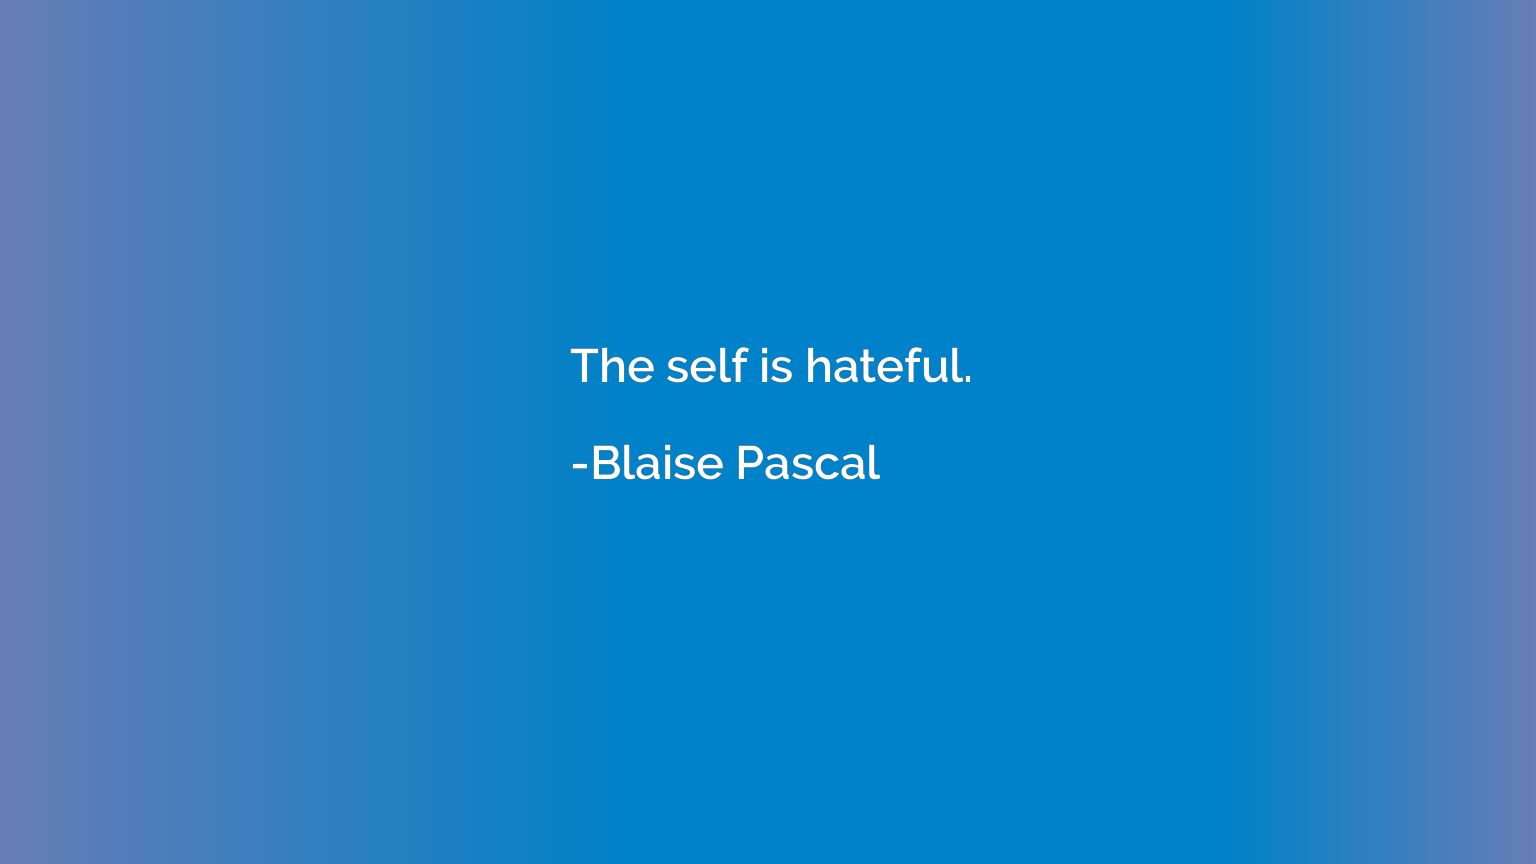 The self is hateful.